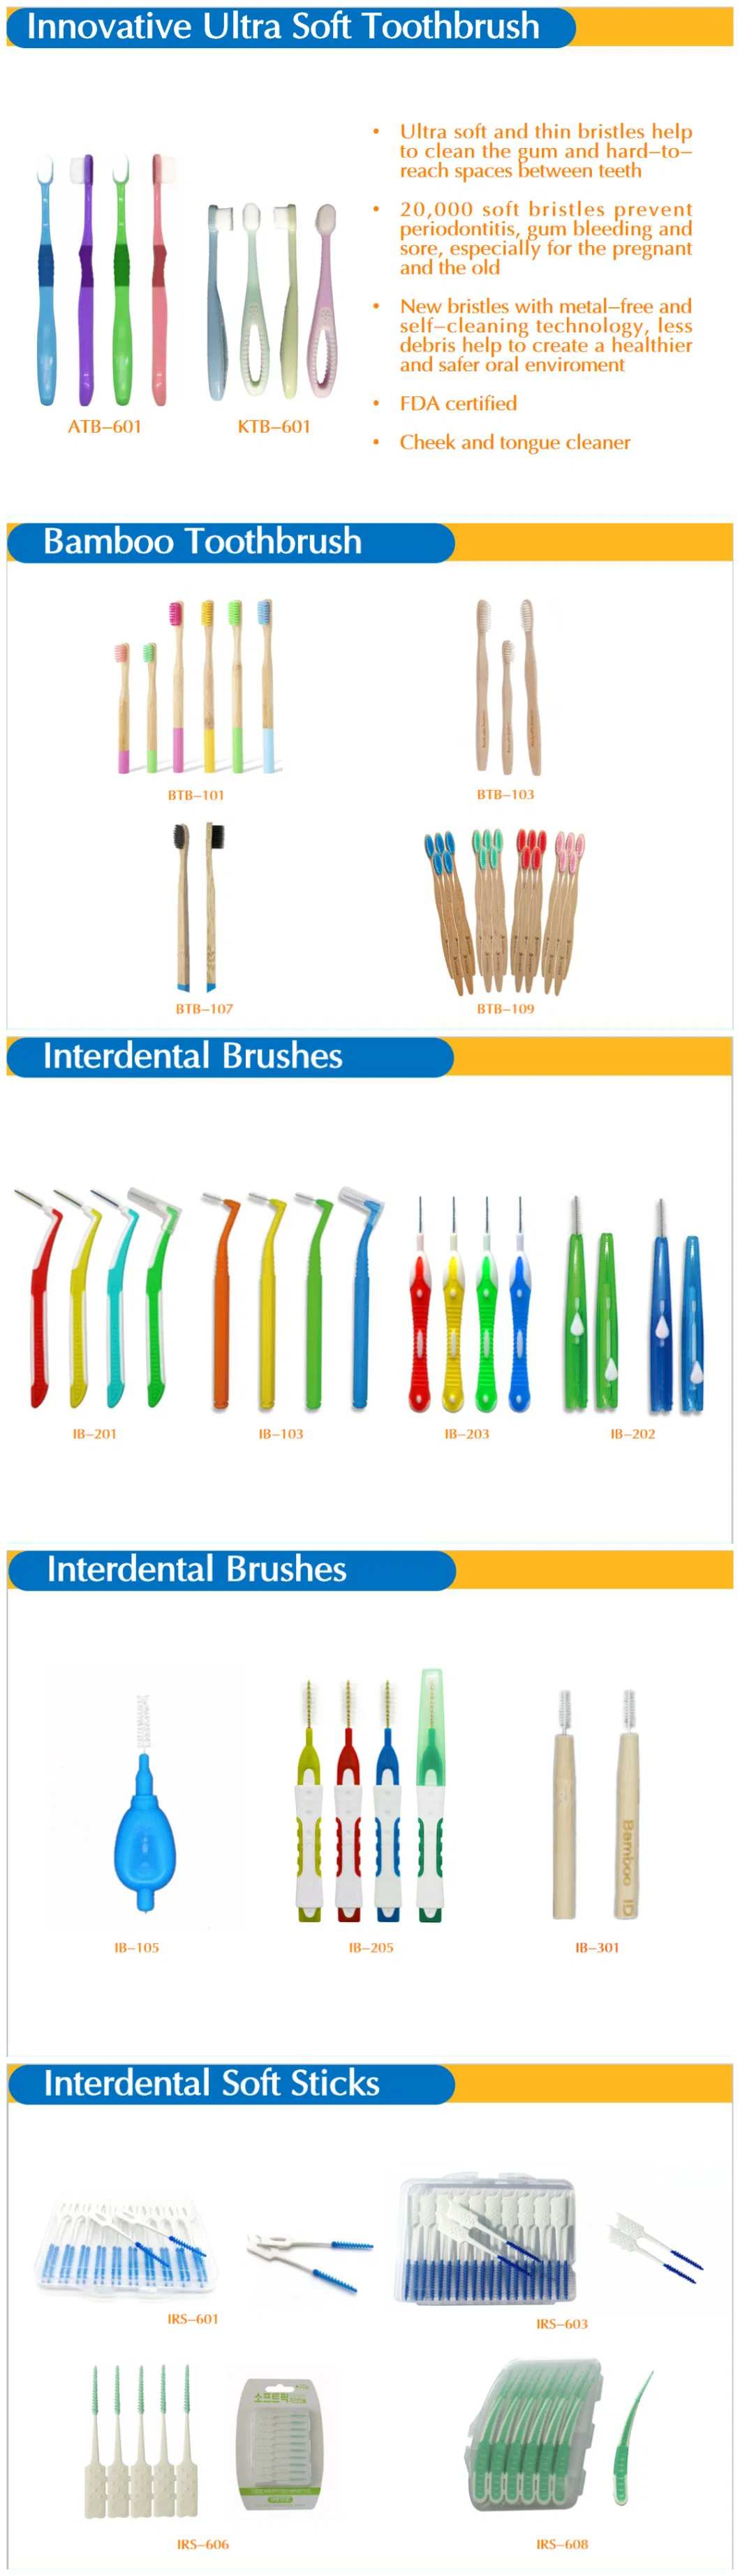 Custom Logo Keep Teeth Healthy and Clean Non-Slip Soft Rubber Design Toothbrush for Adults and Teenager